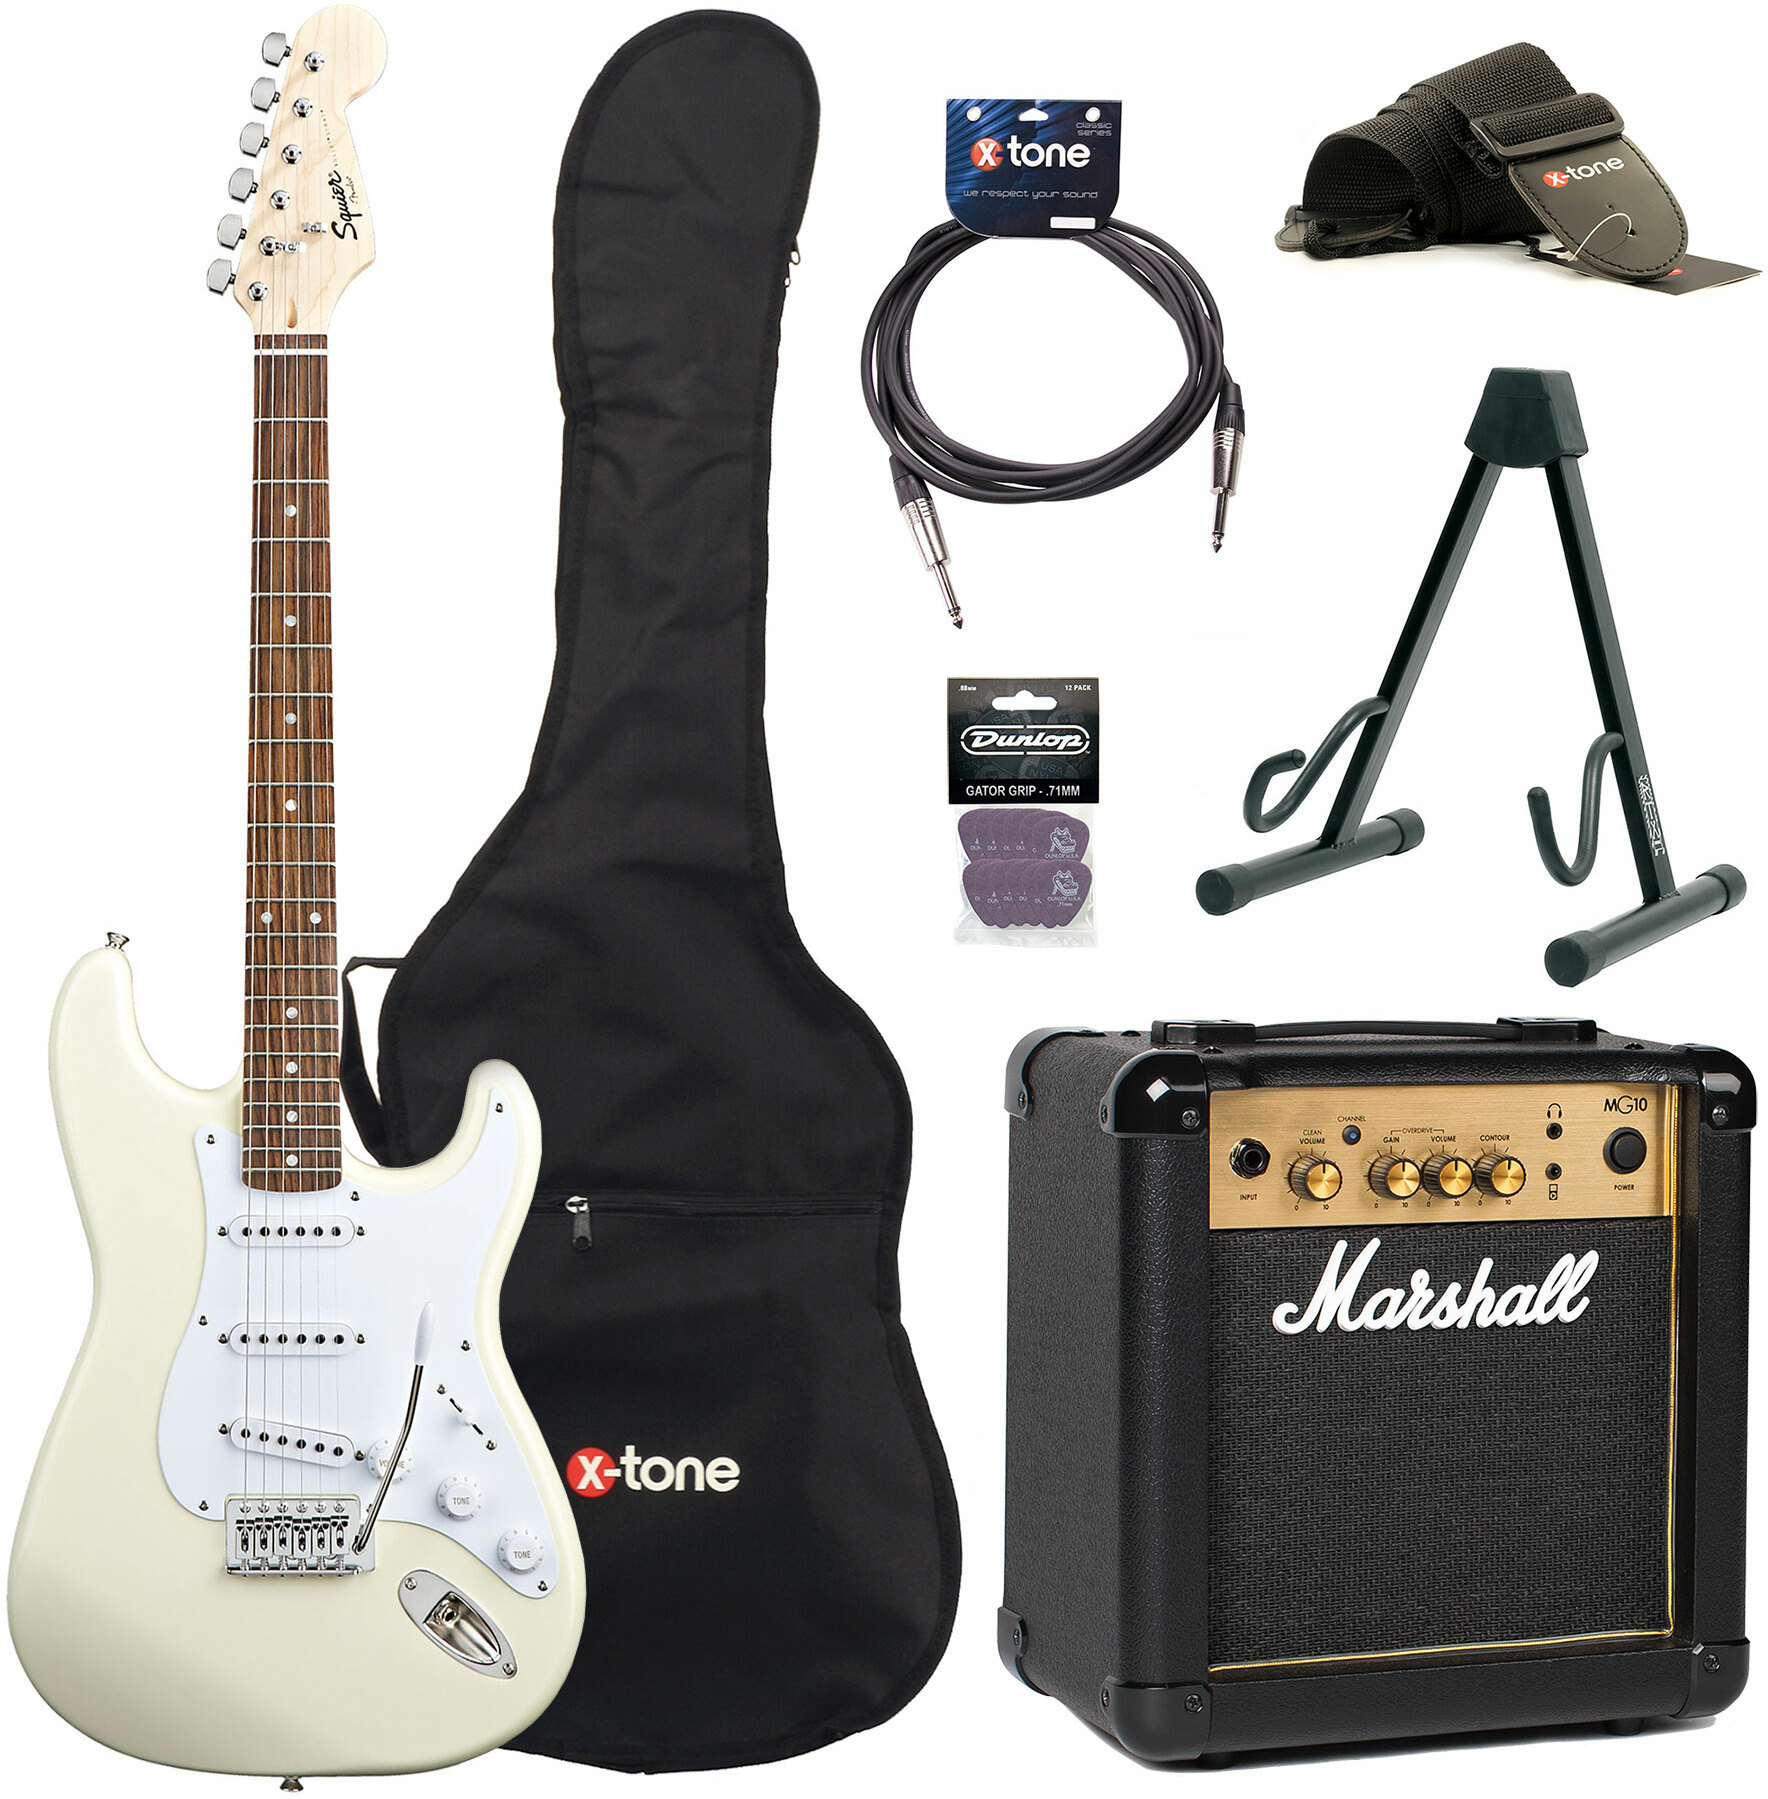 Squier Strat Bullet Sss + Marshall Mg10g + Access X-tone - Arctic White - Packs guitarra eléctrica - Main picture